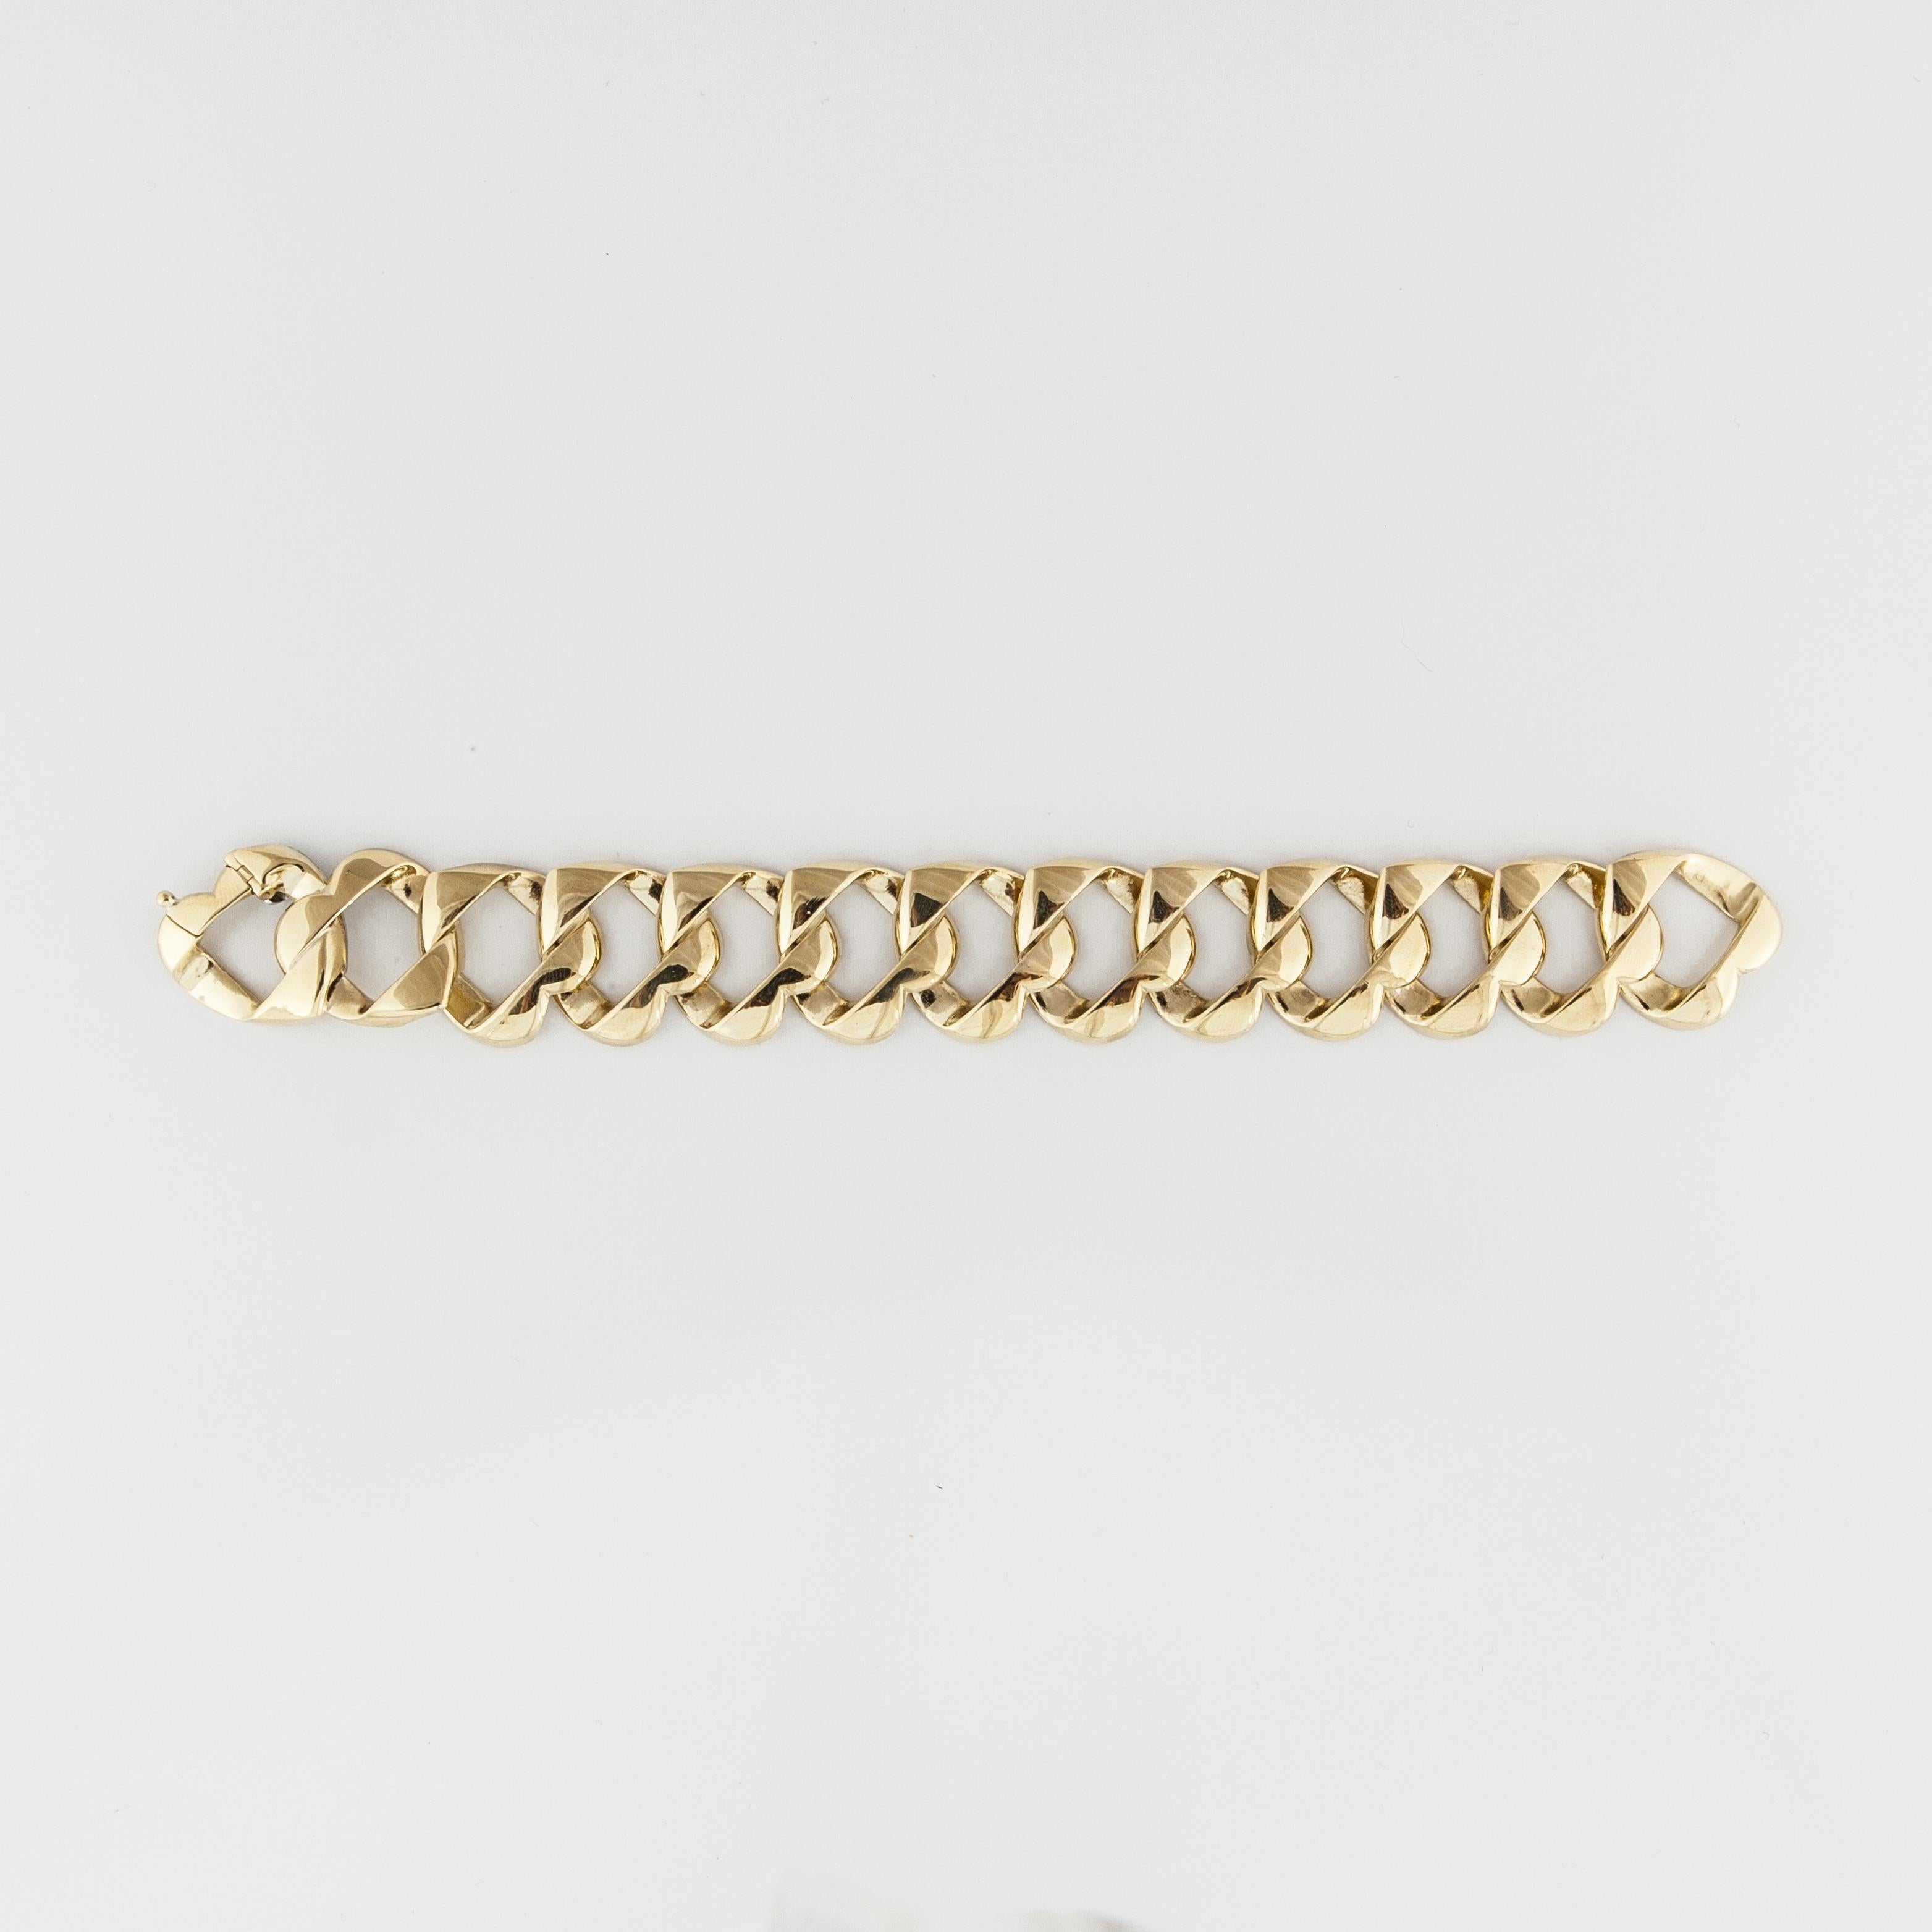 Tiffany & Co. 18K yellow gold bracelet features heart-shaped interlocking links. The bracelet measures 8 inches long and 7/8 inches wide.  